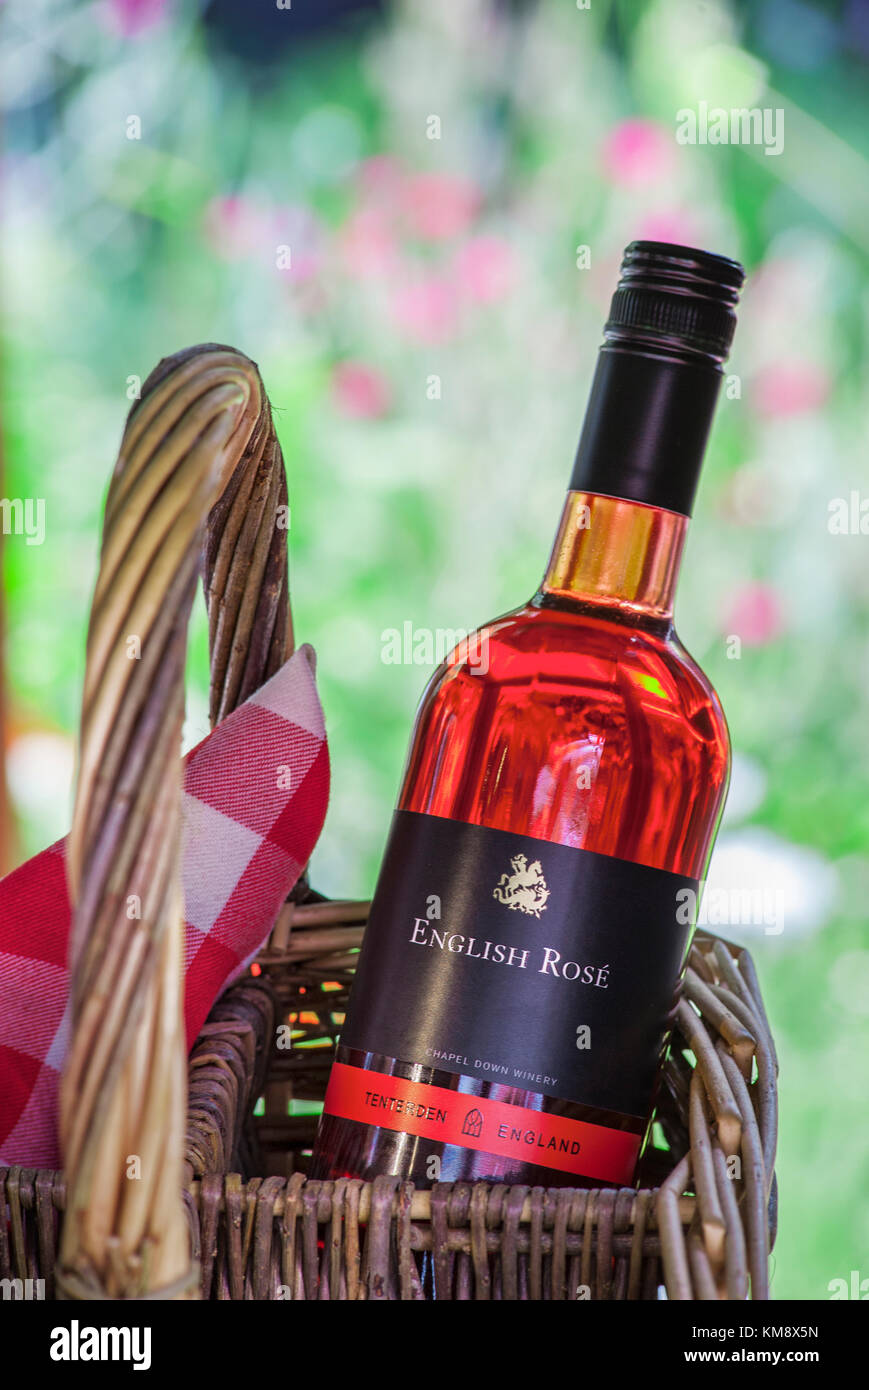 English Rosé wine bottle and wicker bottle carrier basket in alfresco floral garden picnic situation Stock Photo